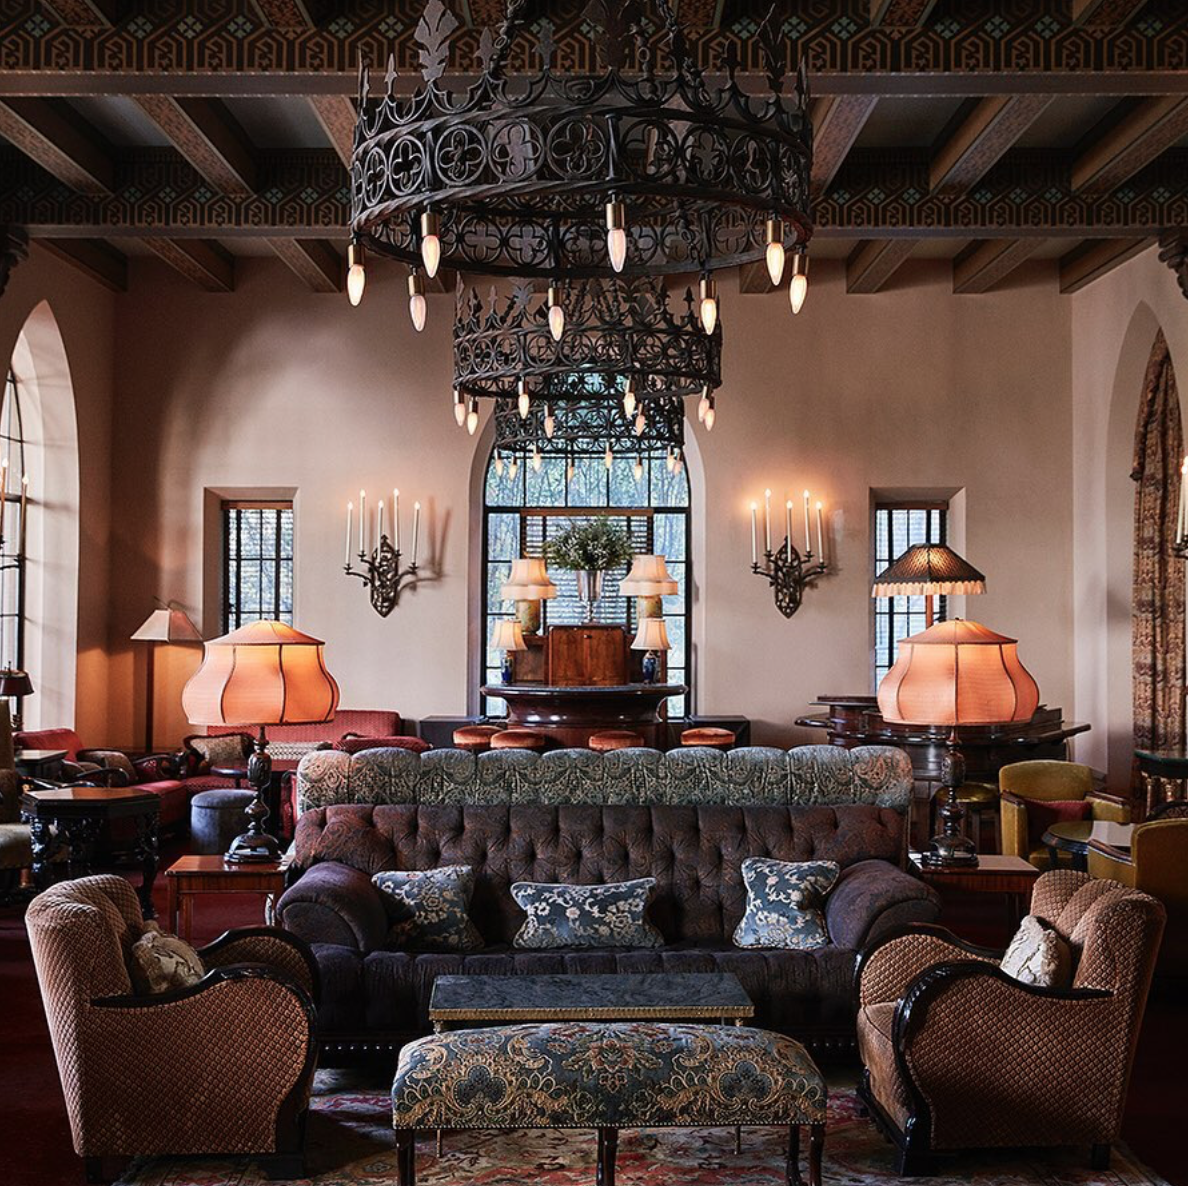 Chateau Marmont Lobby - Chateau Marmont Instagram - West Hollywood